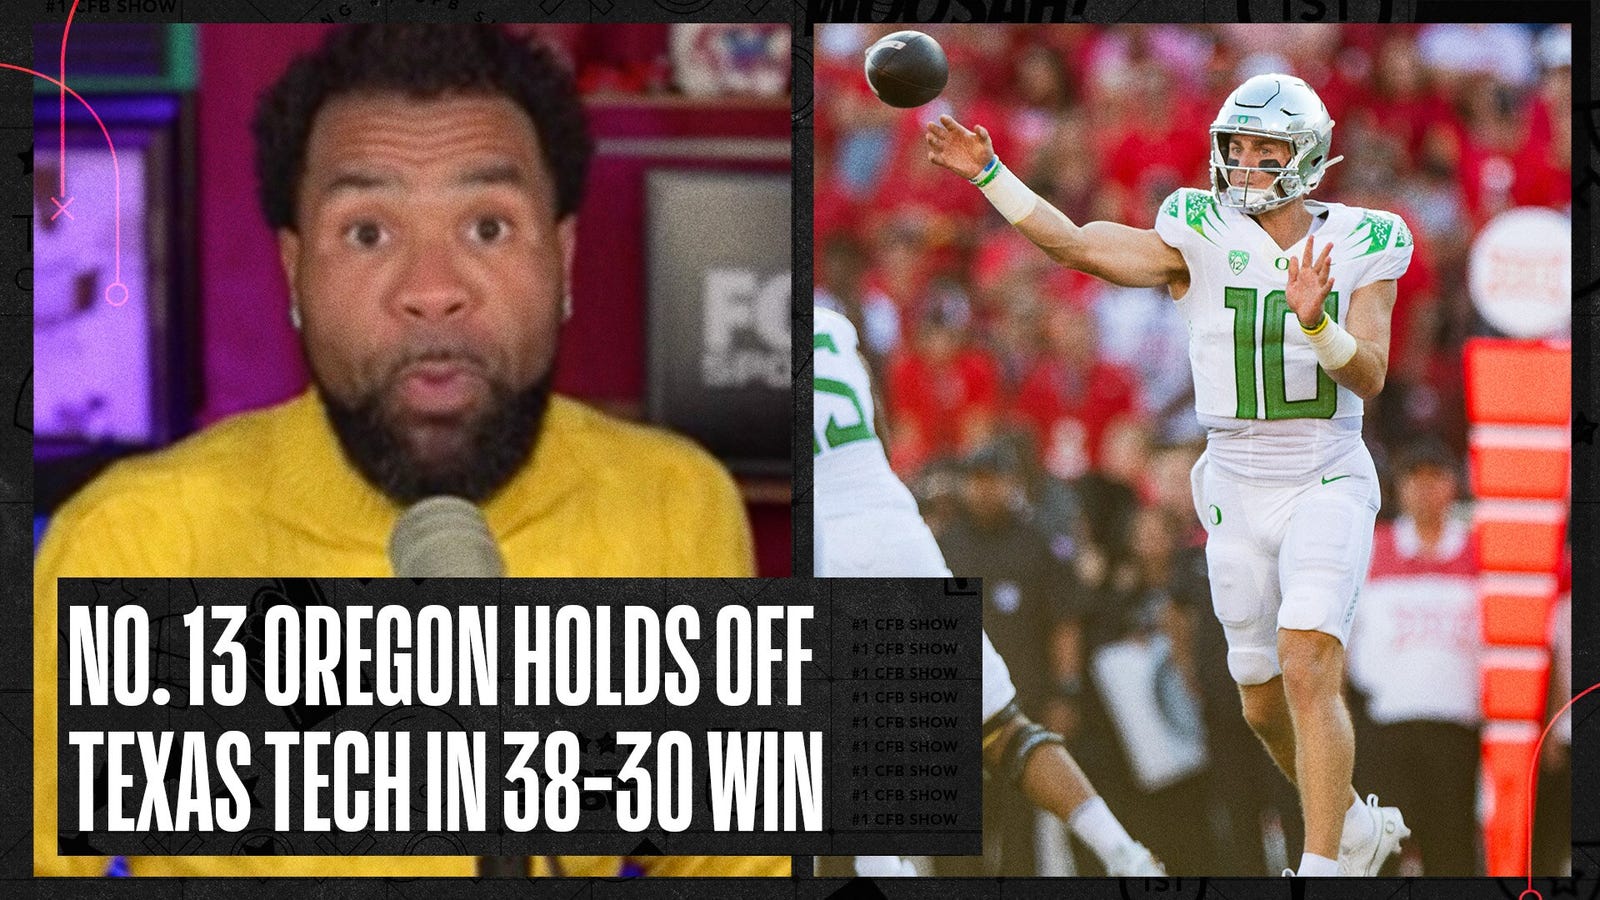 Oregon holds off Texas Tech in wild finish